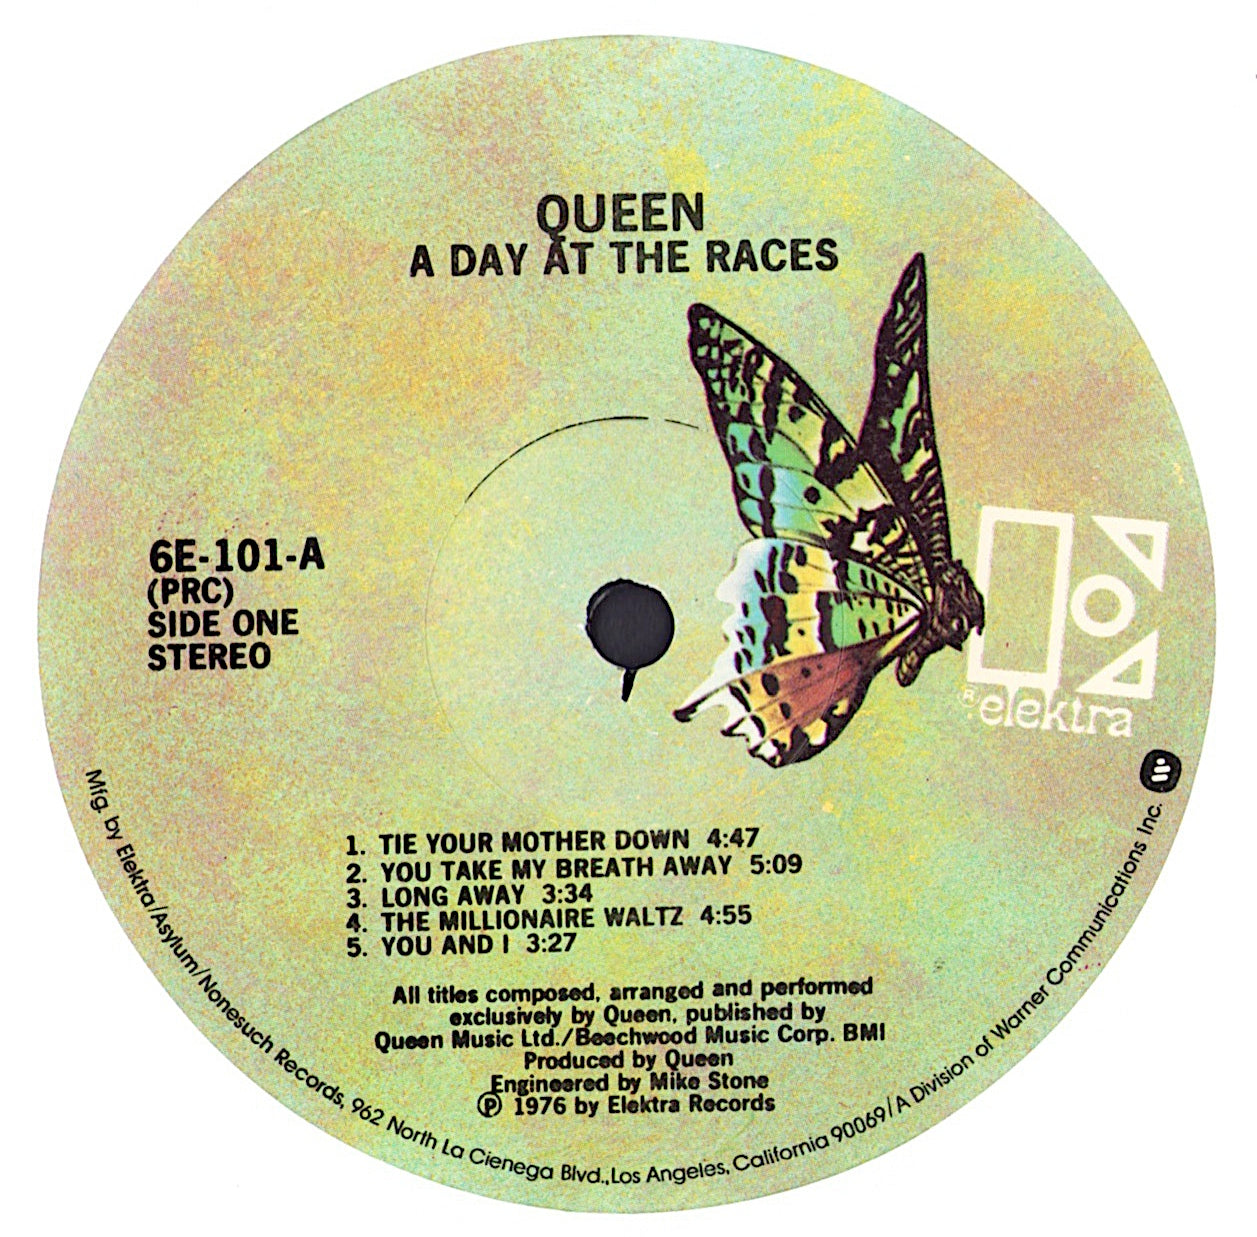 Queen ‎- A Day At The Races Vinyl LP